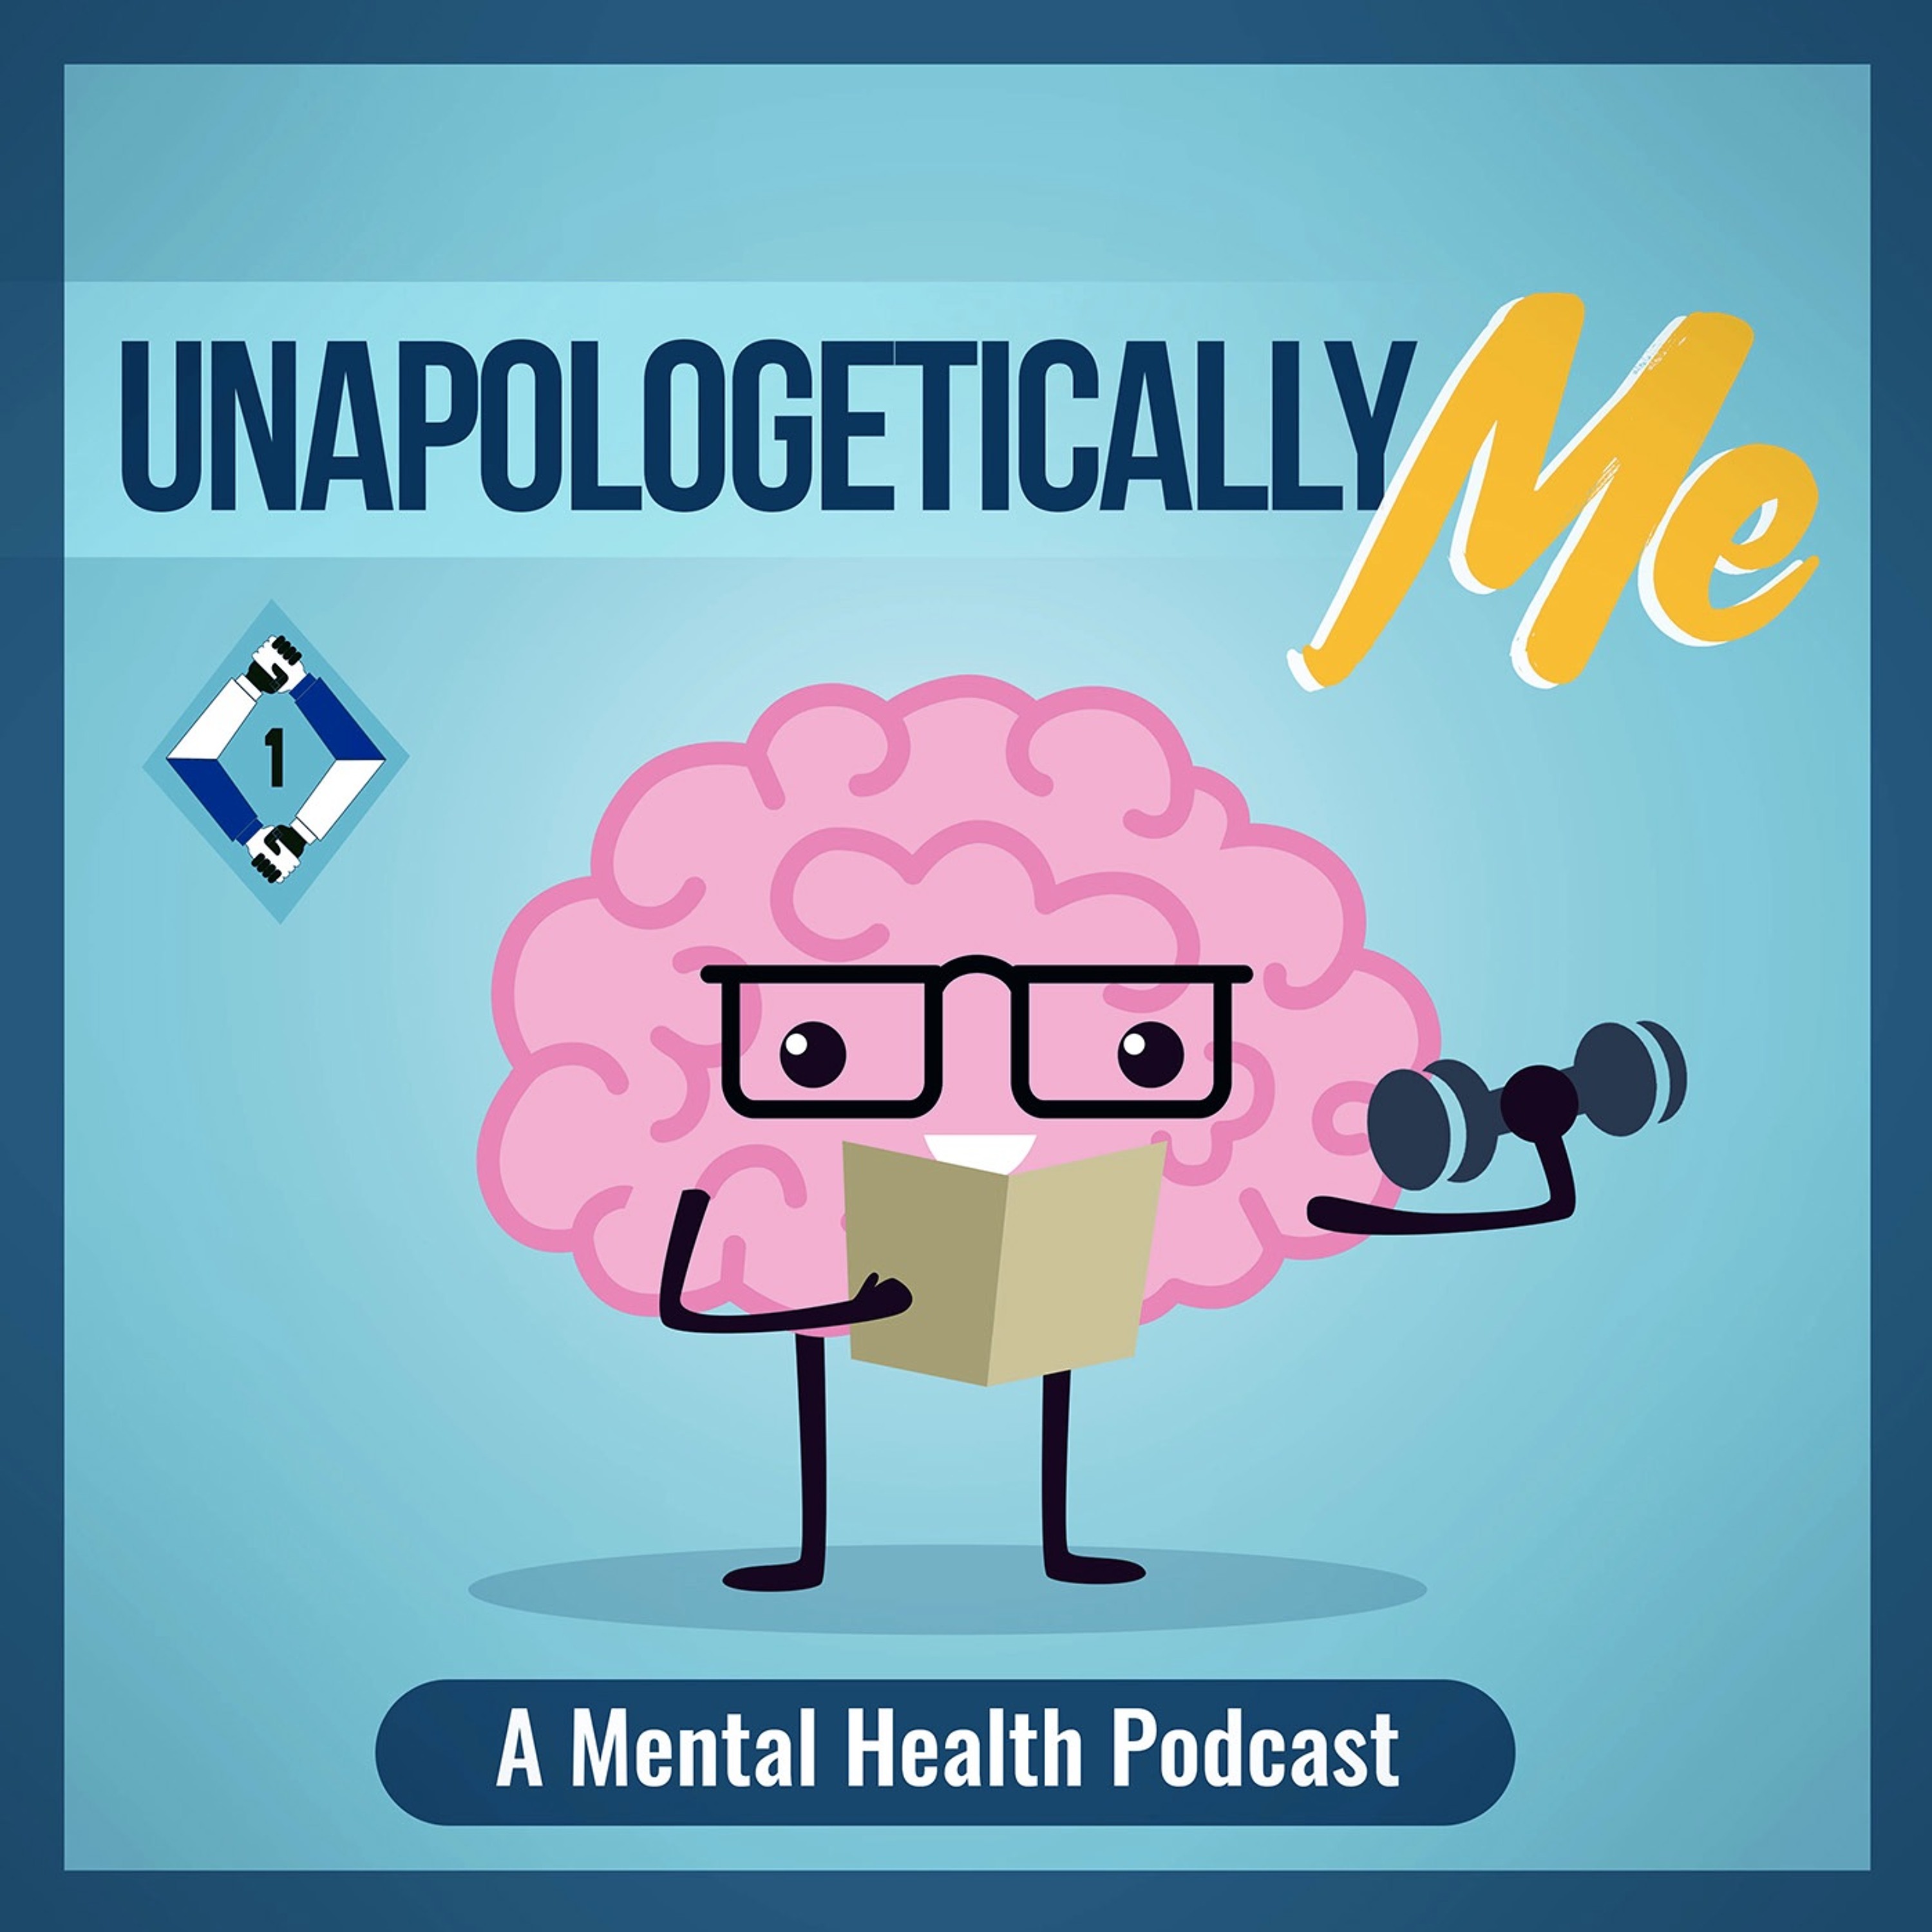 Unapologetically Me: A Mental Health Podcast - Cystic Fibrosis Fighter